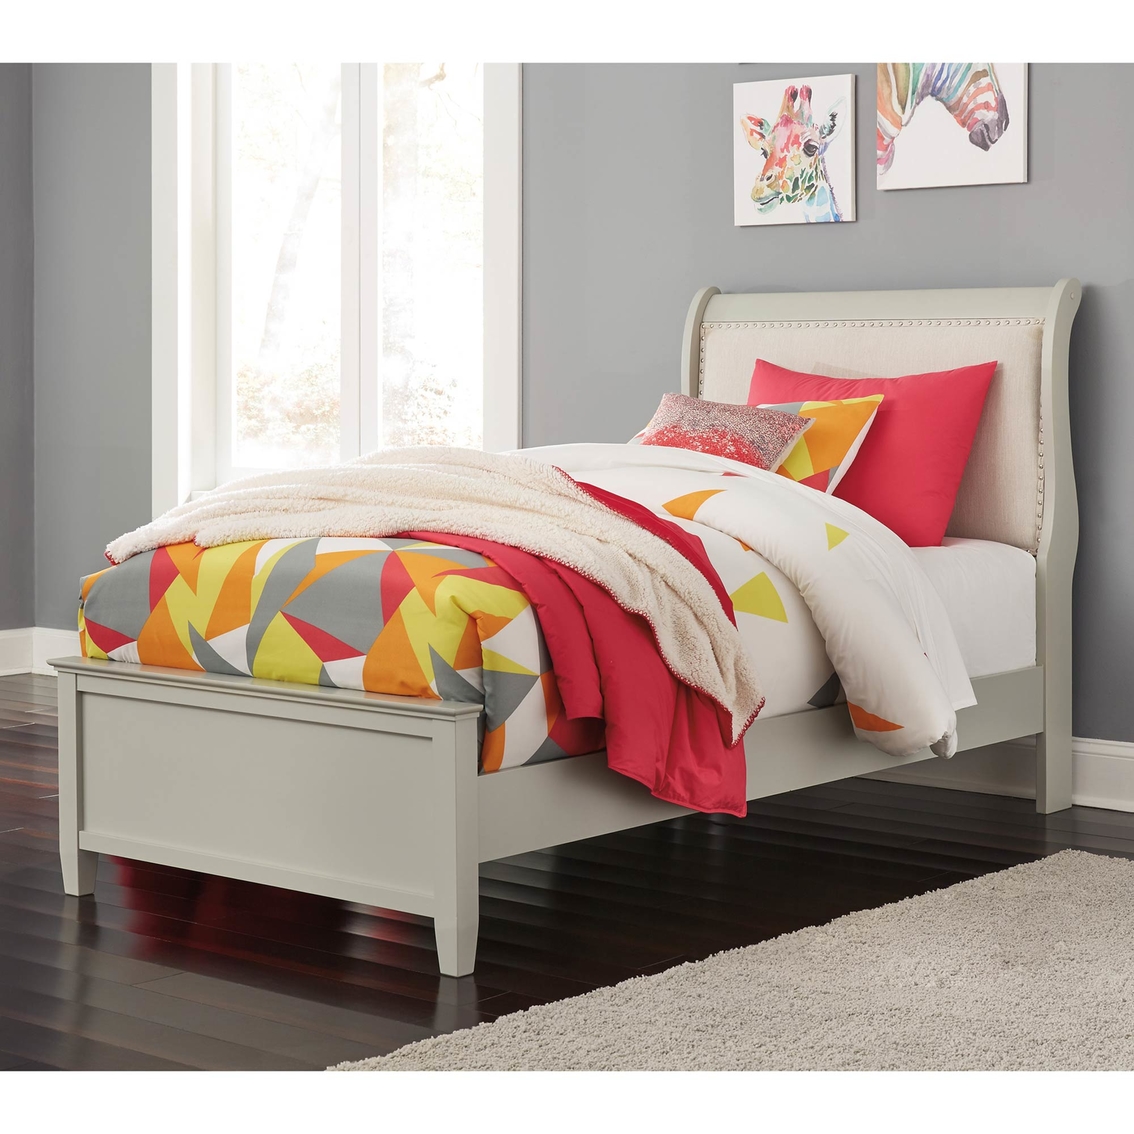 Signature Design by Ashley Jorstand Upholstered Sleigh Bed - Image 3 of 4